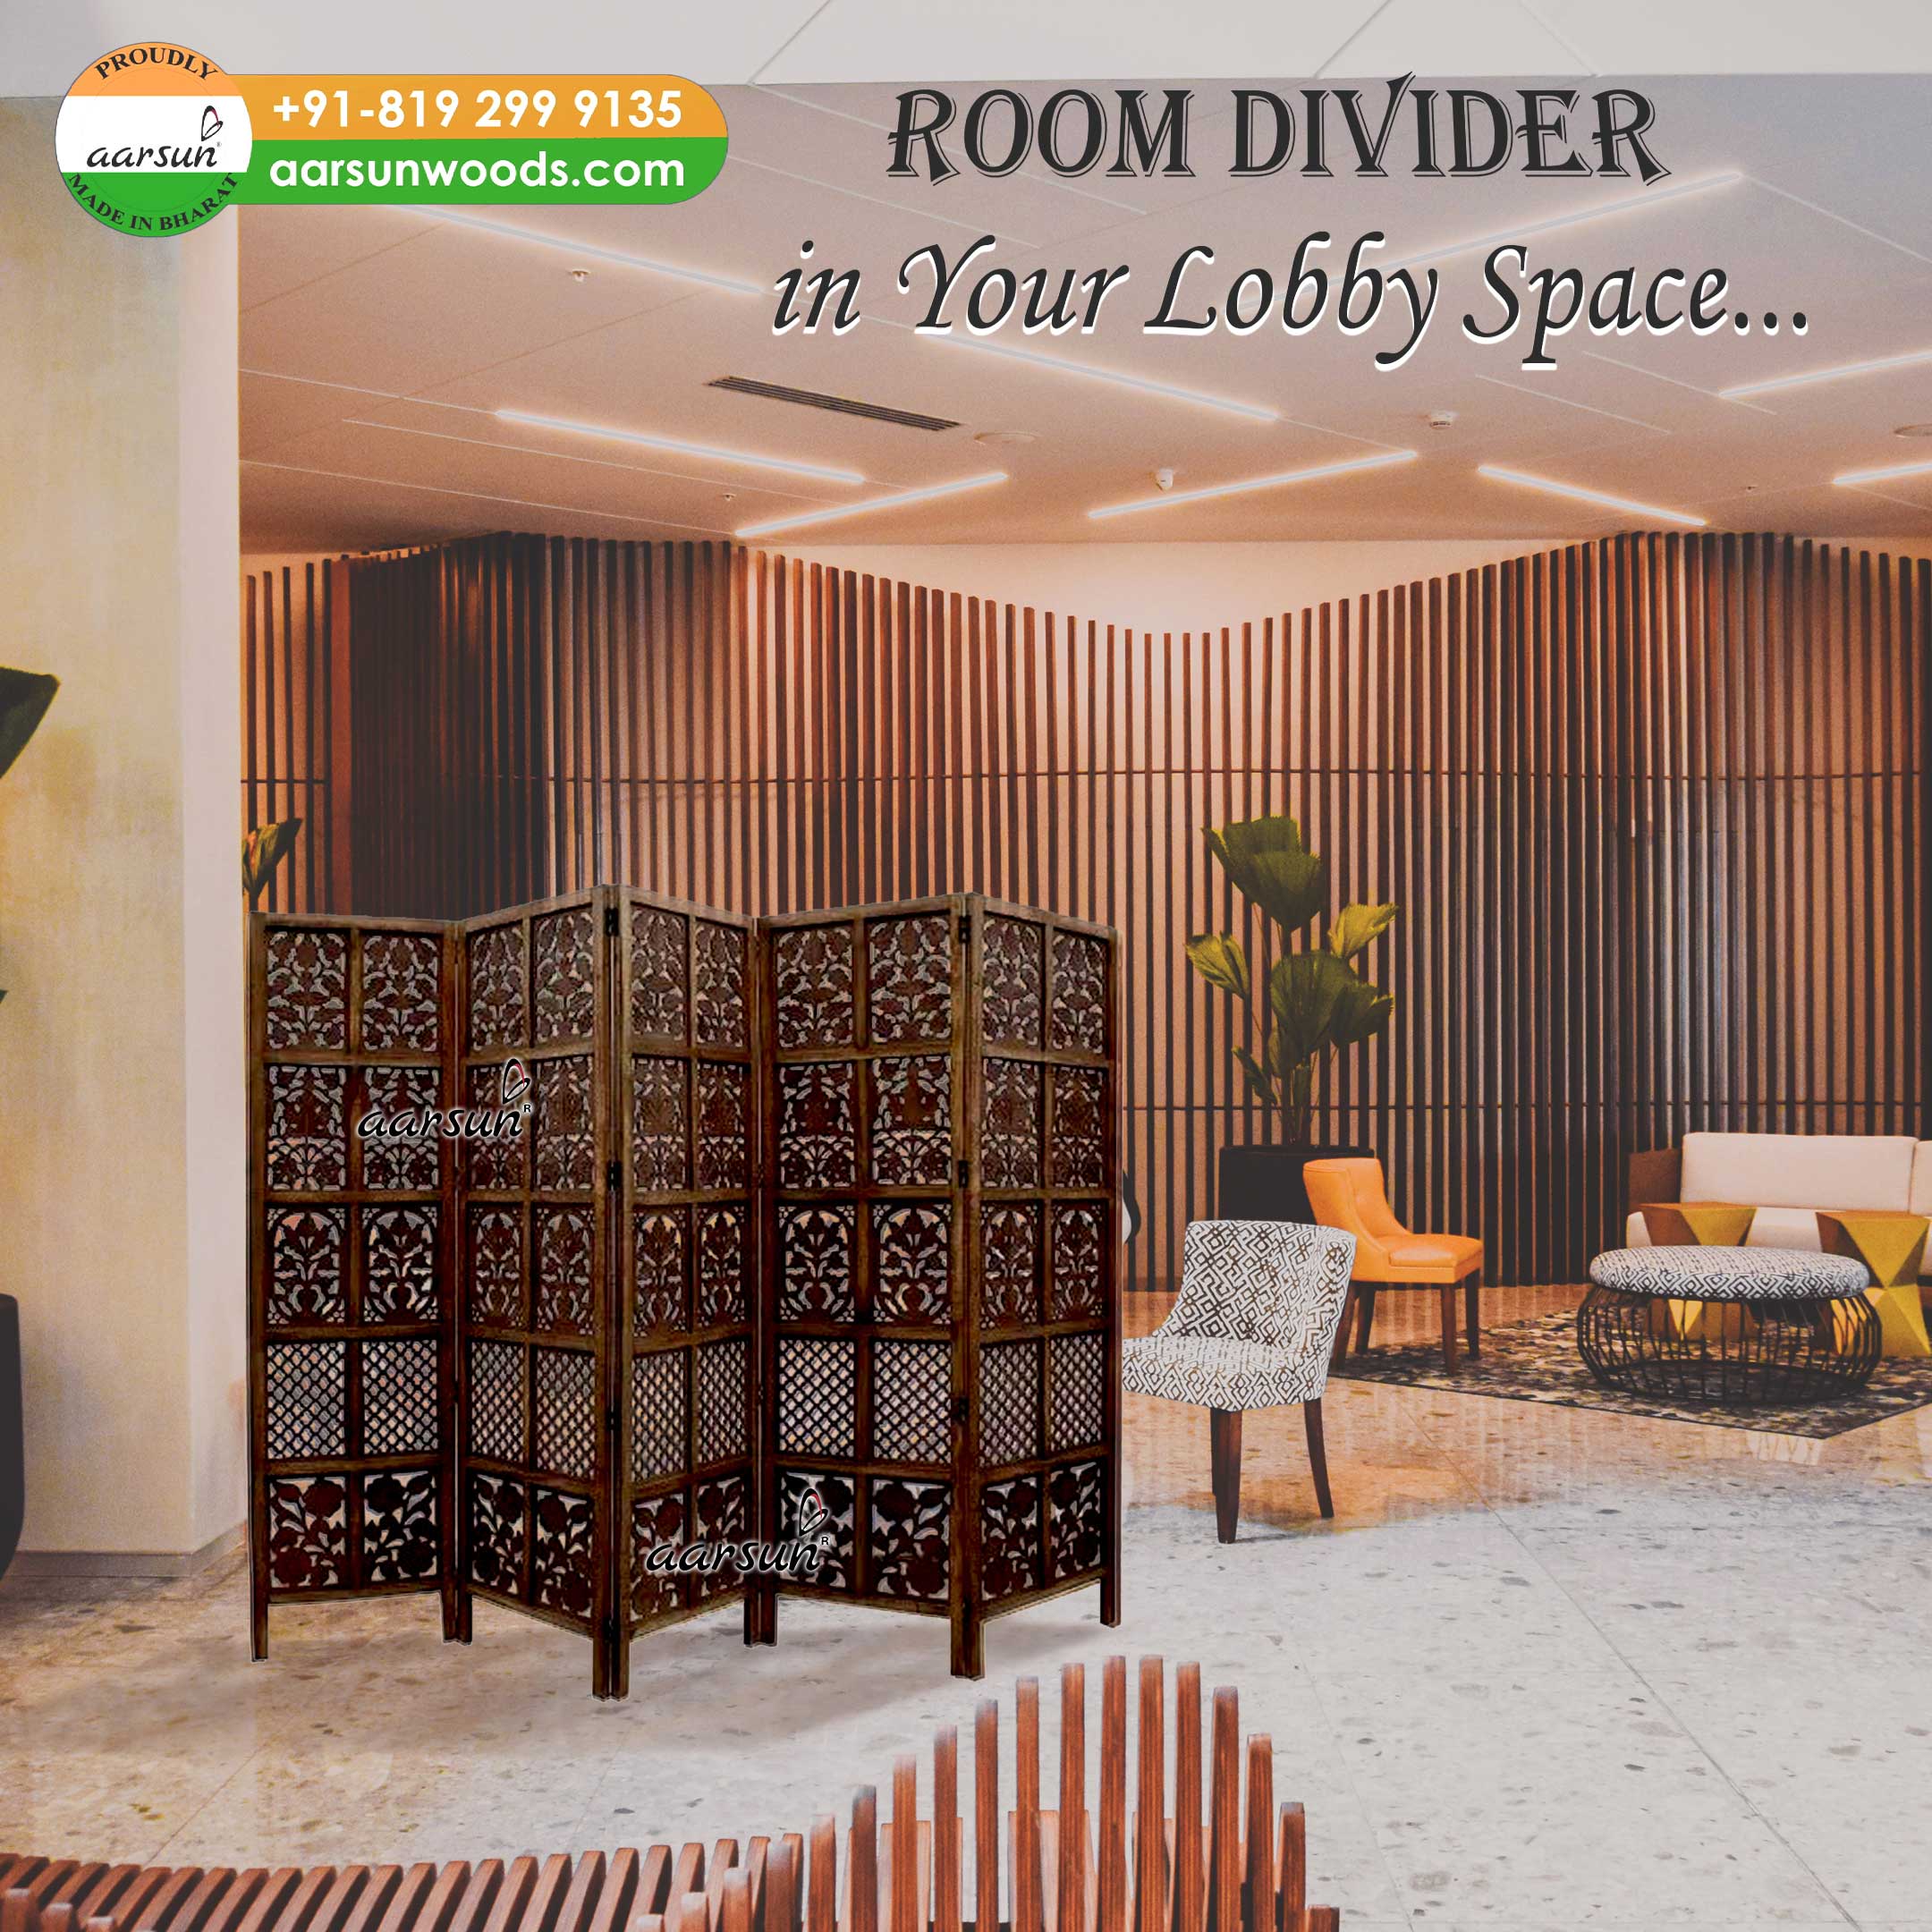 Room-divider-in-lobby-space